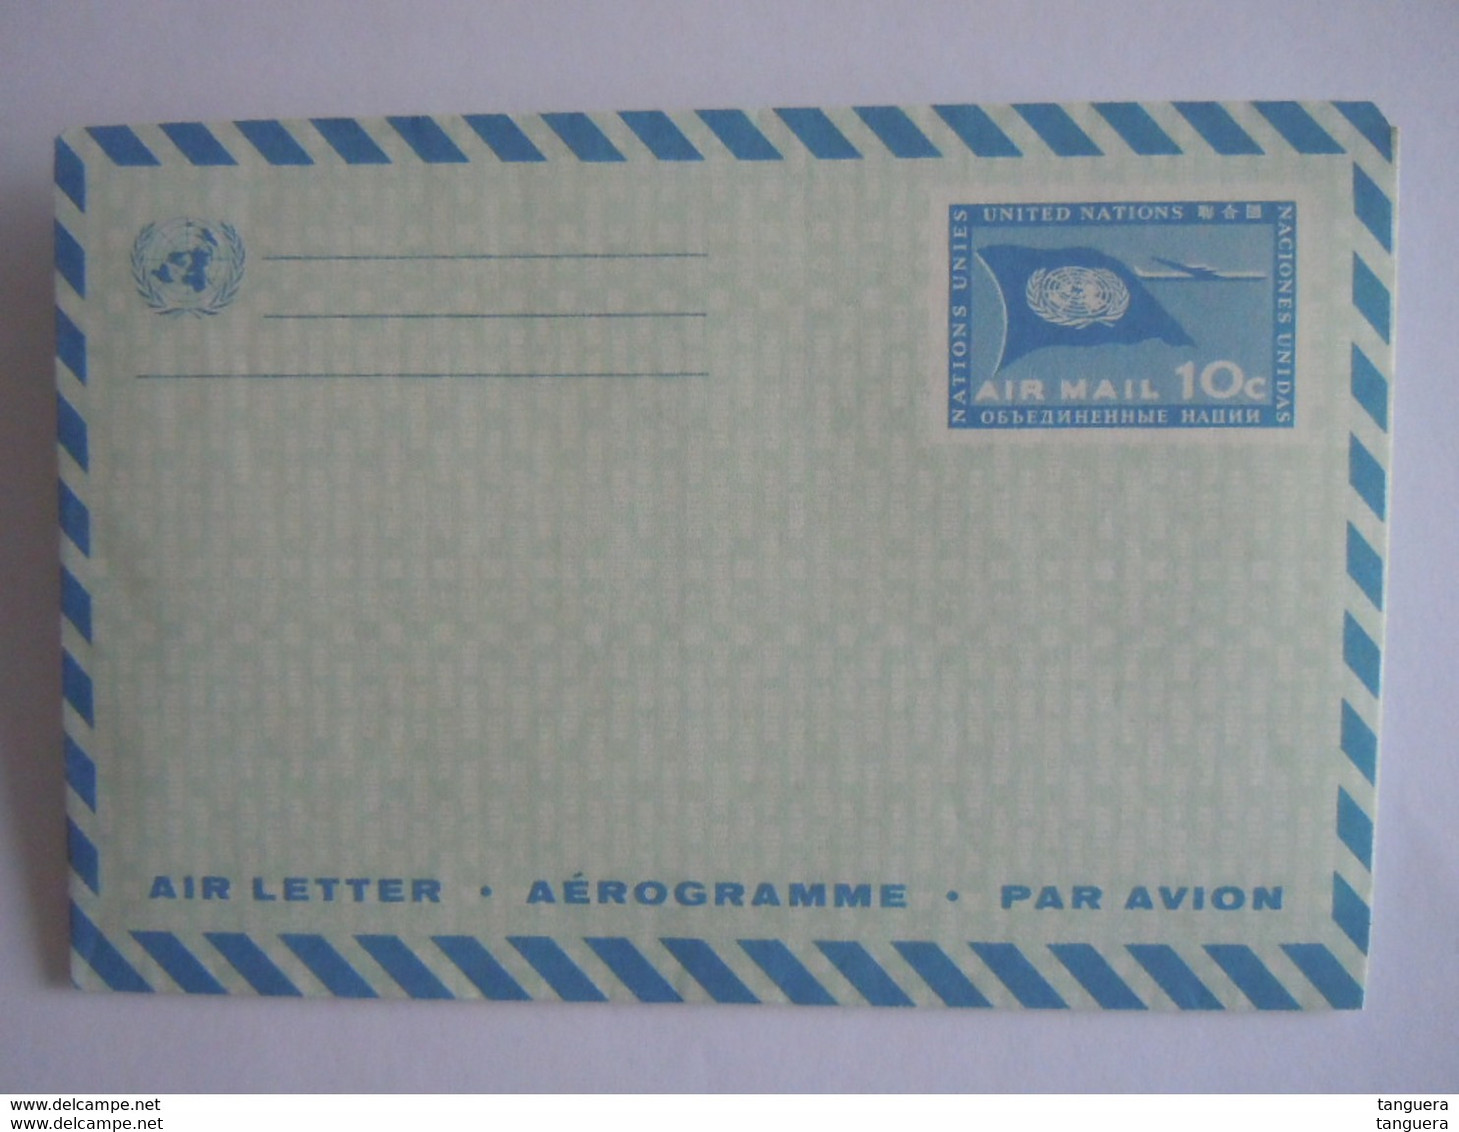 UN UNO United Nations New York Aerogramme Stationery Entier Postal Air Letter Flag 10c Mint - Luftpost